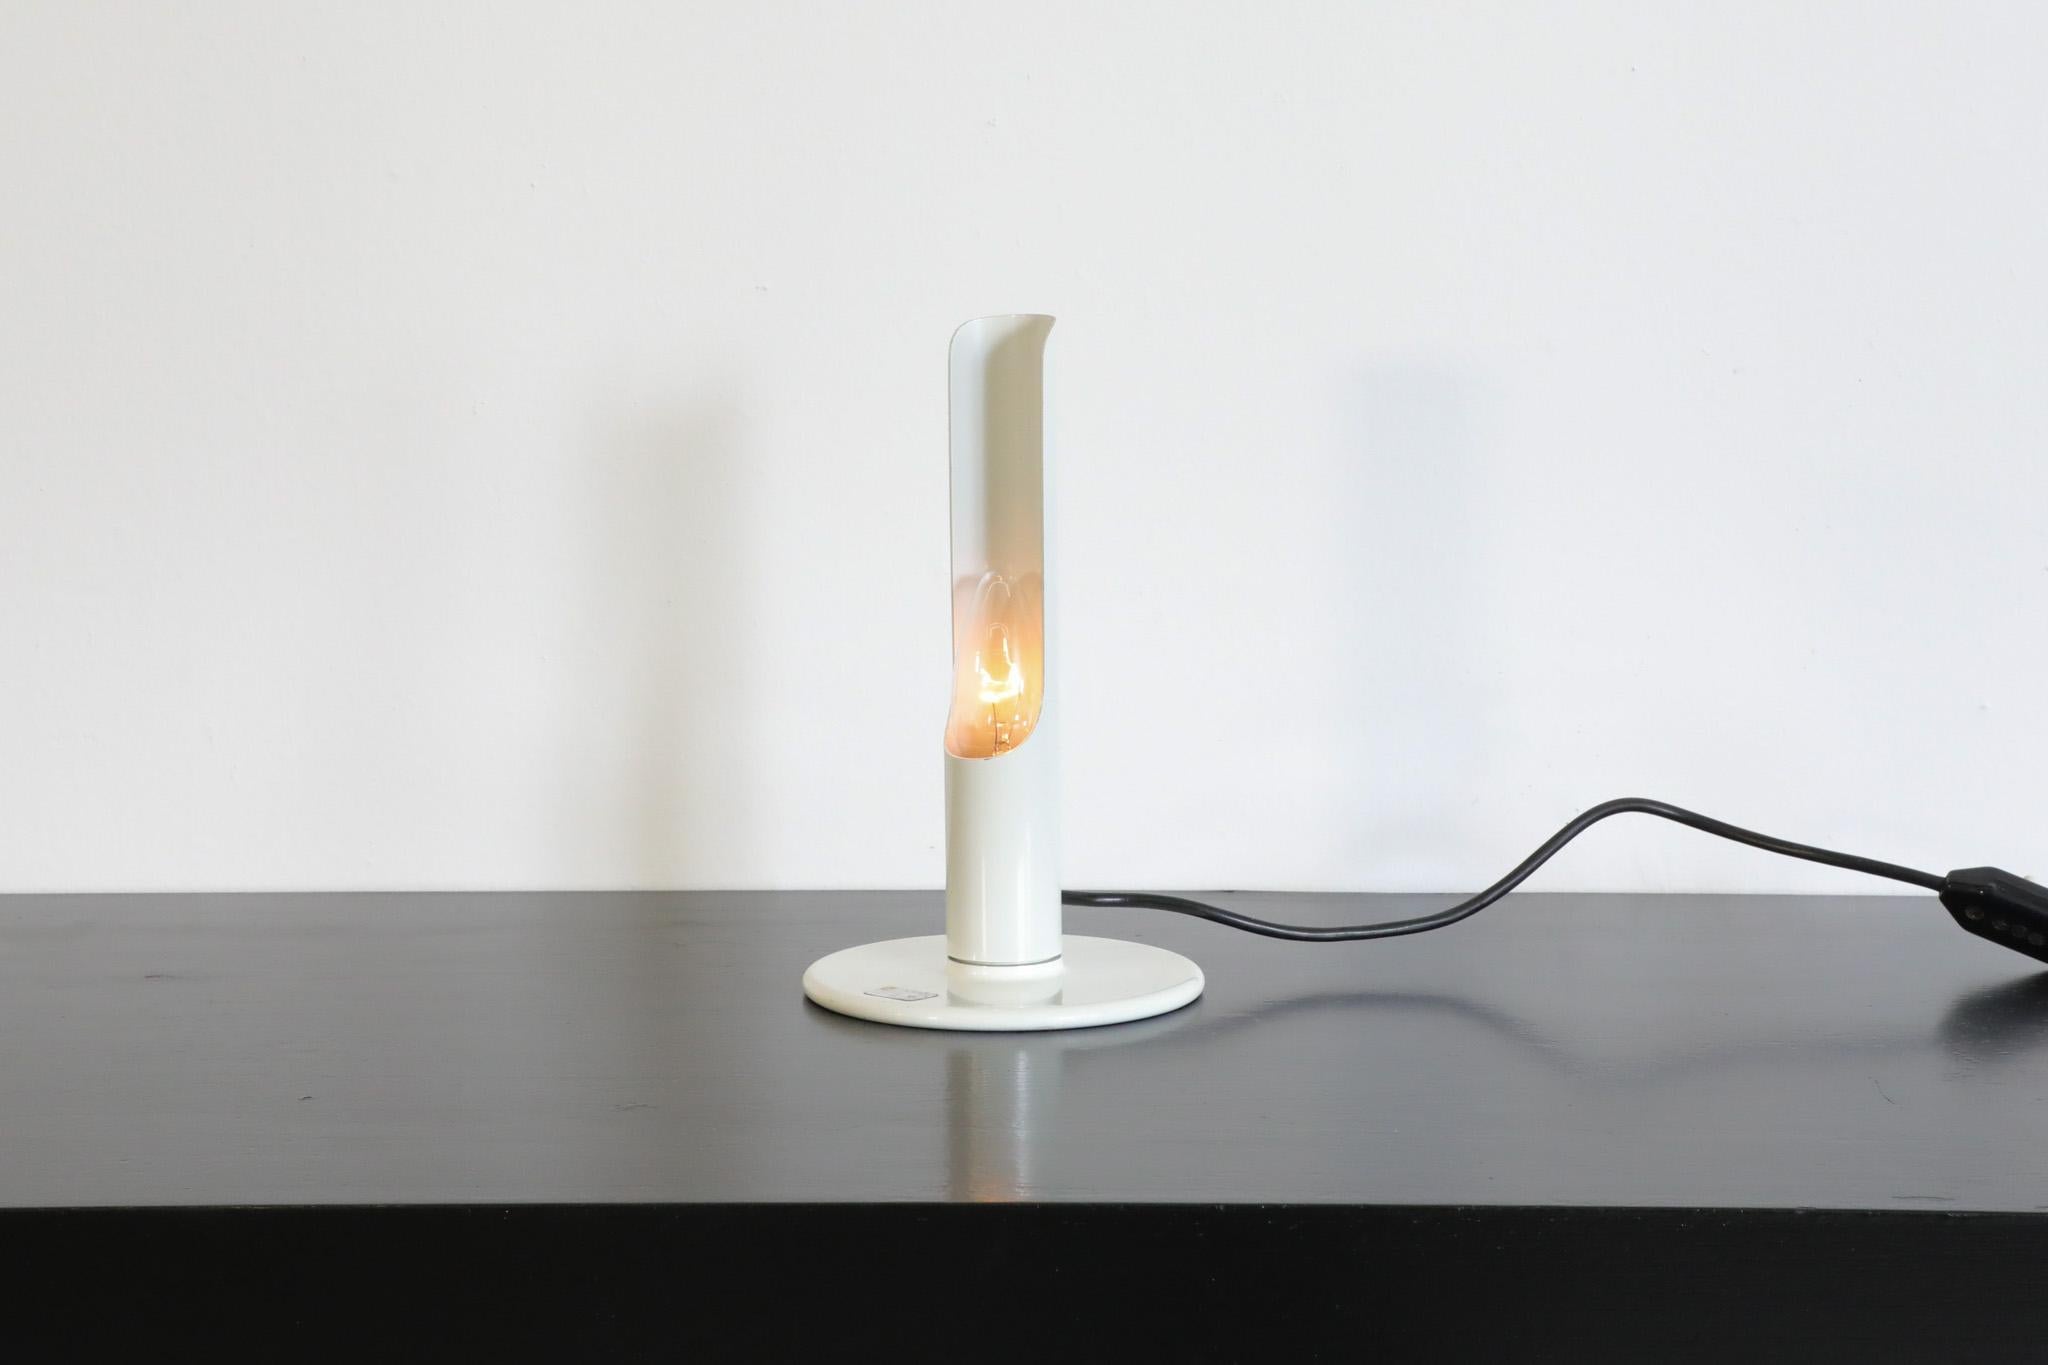 Incredible 'Prix' desk lamp by highly influential and highly innovative German designer Ingo Maurer for M Design, 1970's. This is a white enameled metal table lamp with round metal base and candelabra socket. This attractive lamp stylistically